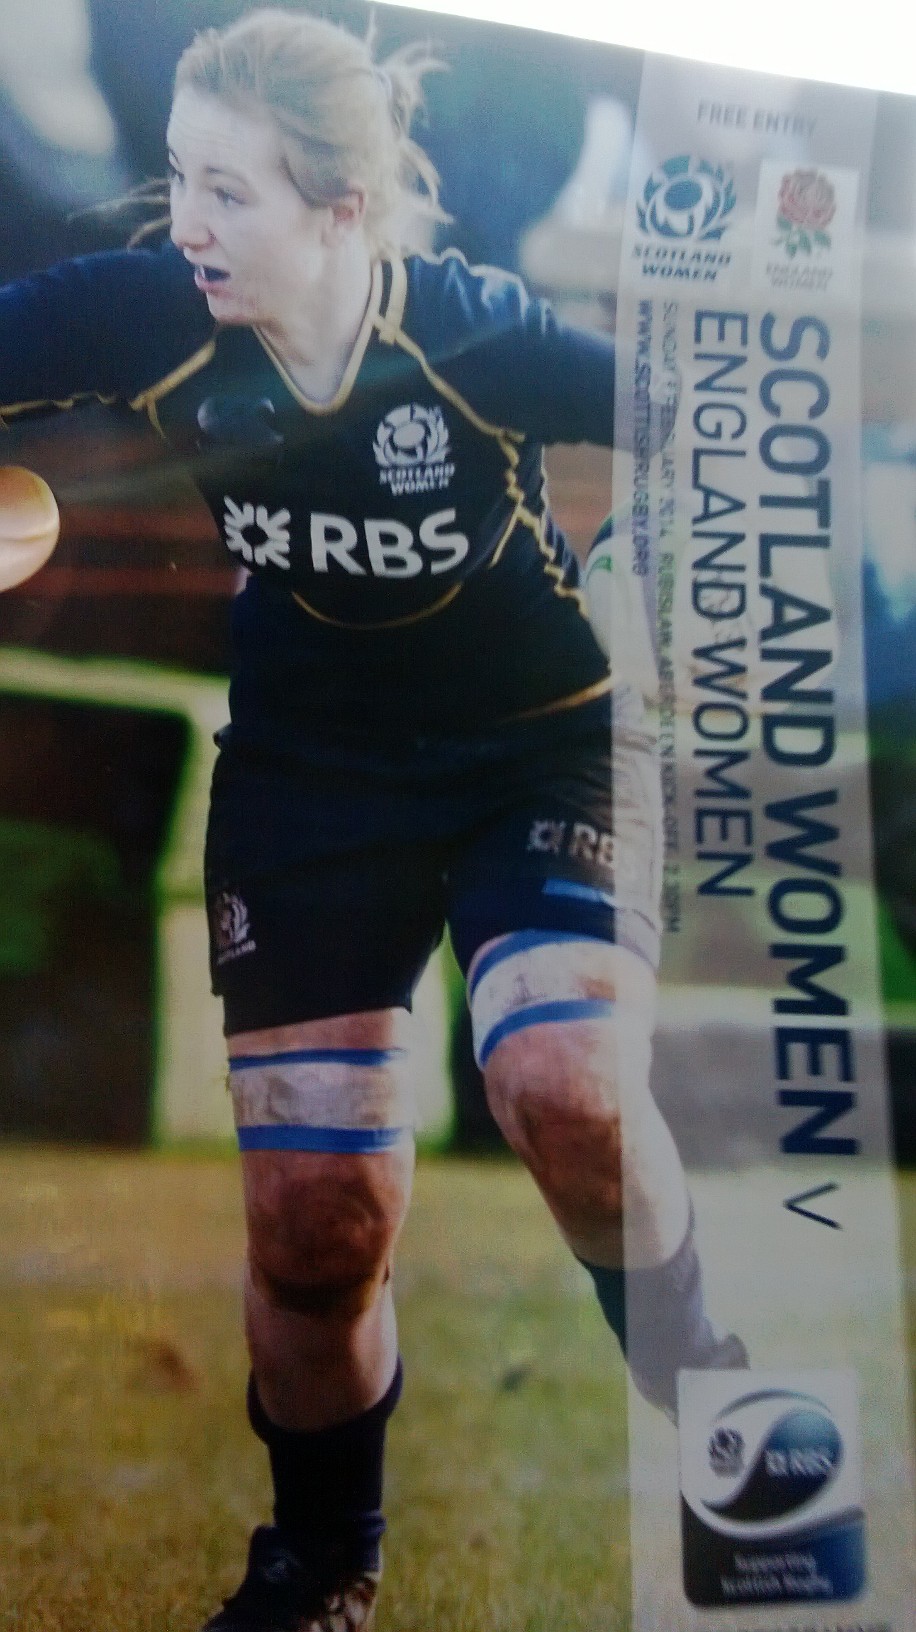 Rugby Program for the Scotland vs England women game